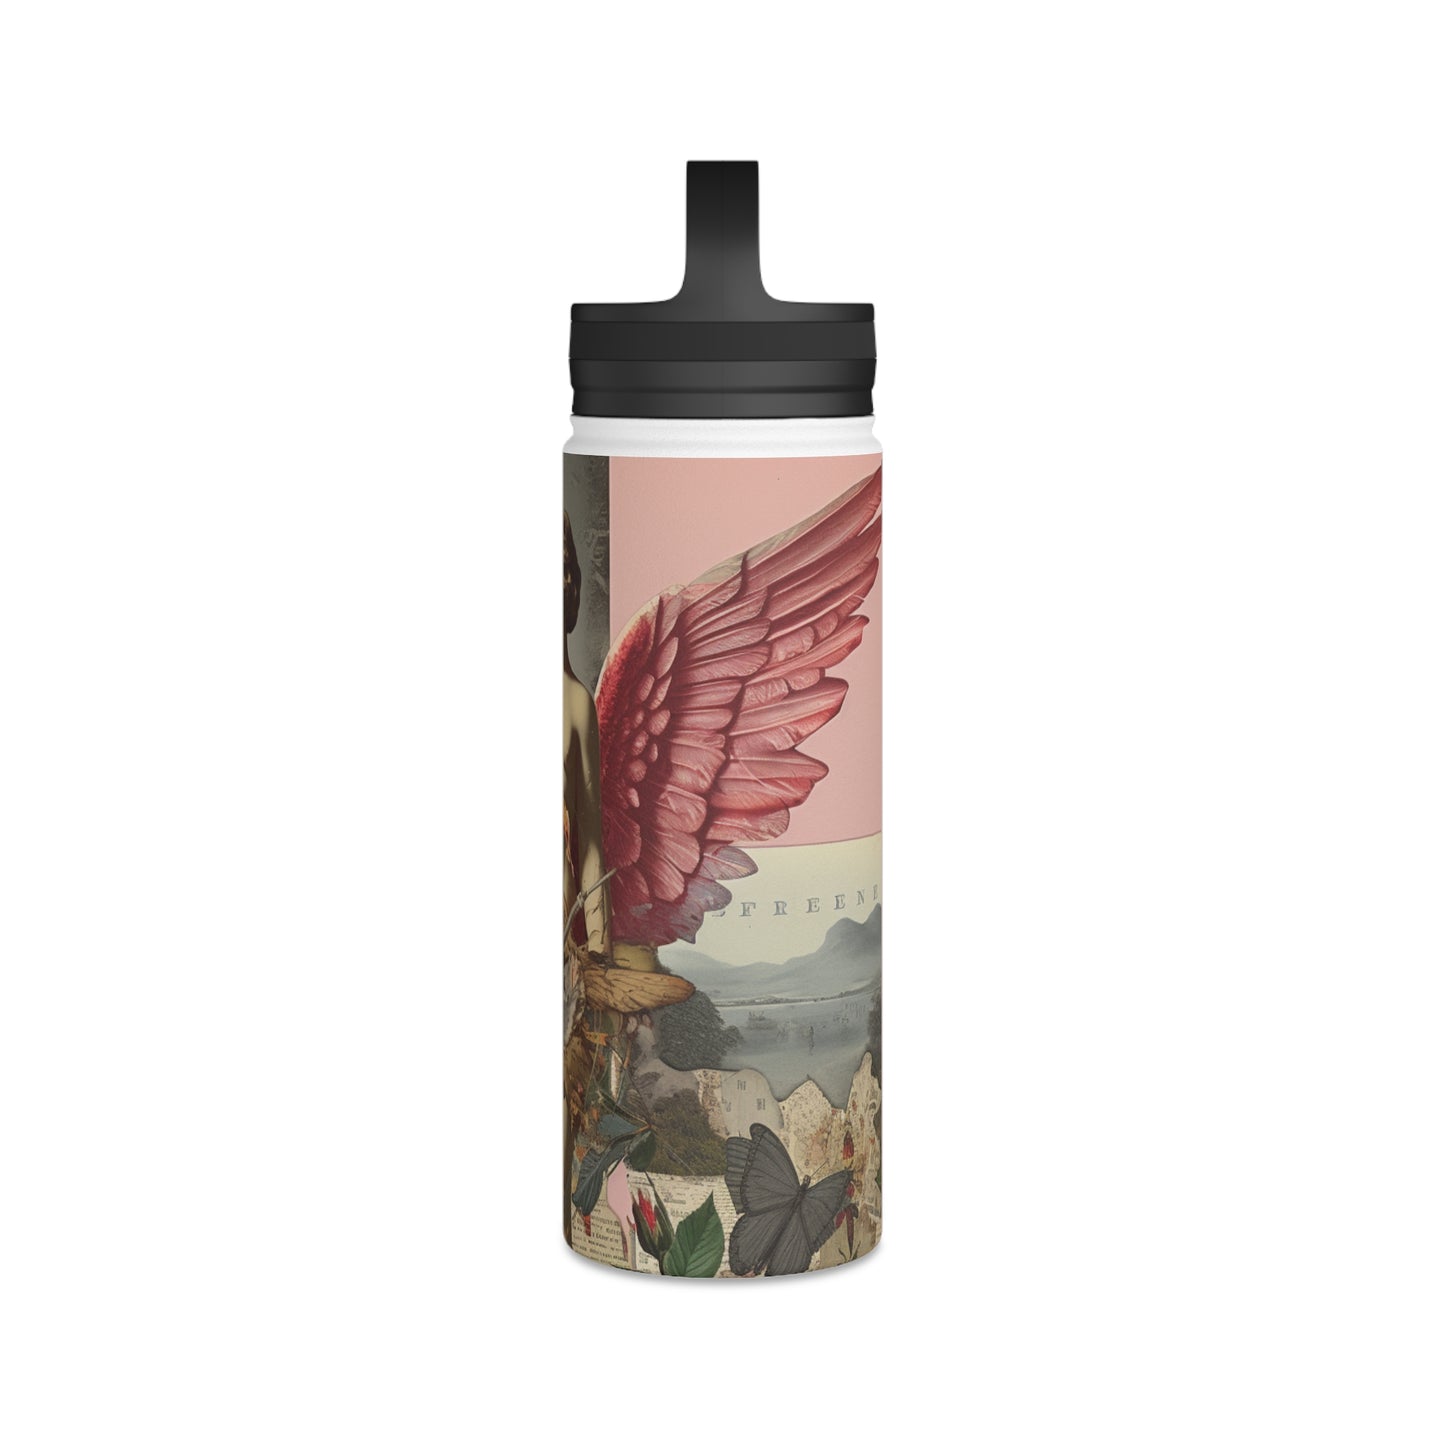 William Shakespeare Inspired Stainless Steel Water Bottle | For Book Lovers & Adventure Seekers